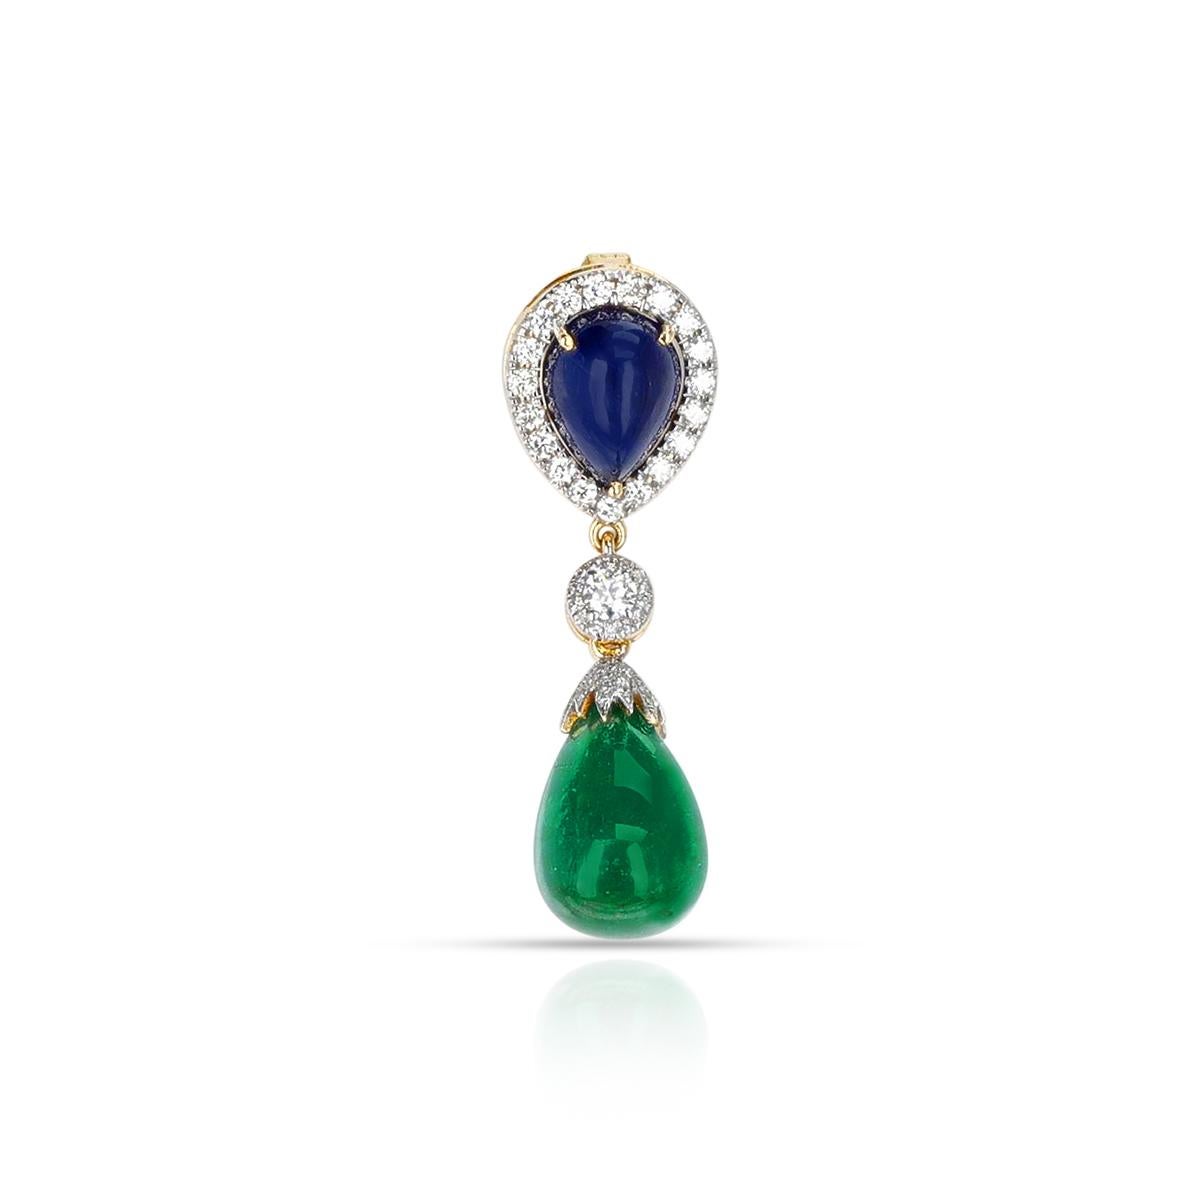 A Pear Shape Sapphire and Emerald Drop Pendant with Diamonds made in 18 Karat Yellow Gold. The emerald weighs appx. 9 carats and the sapphire weights appx. 4 carats. The diamonds weigh 0.57 carats. The length of the pendant is 1.50 inches. The total